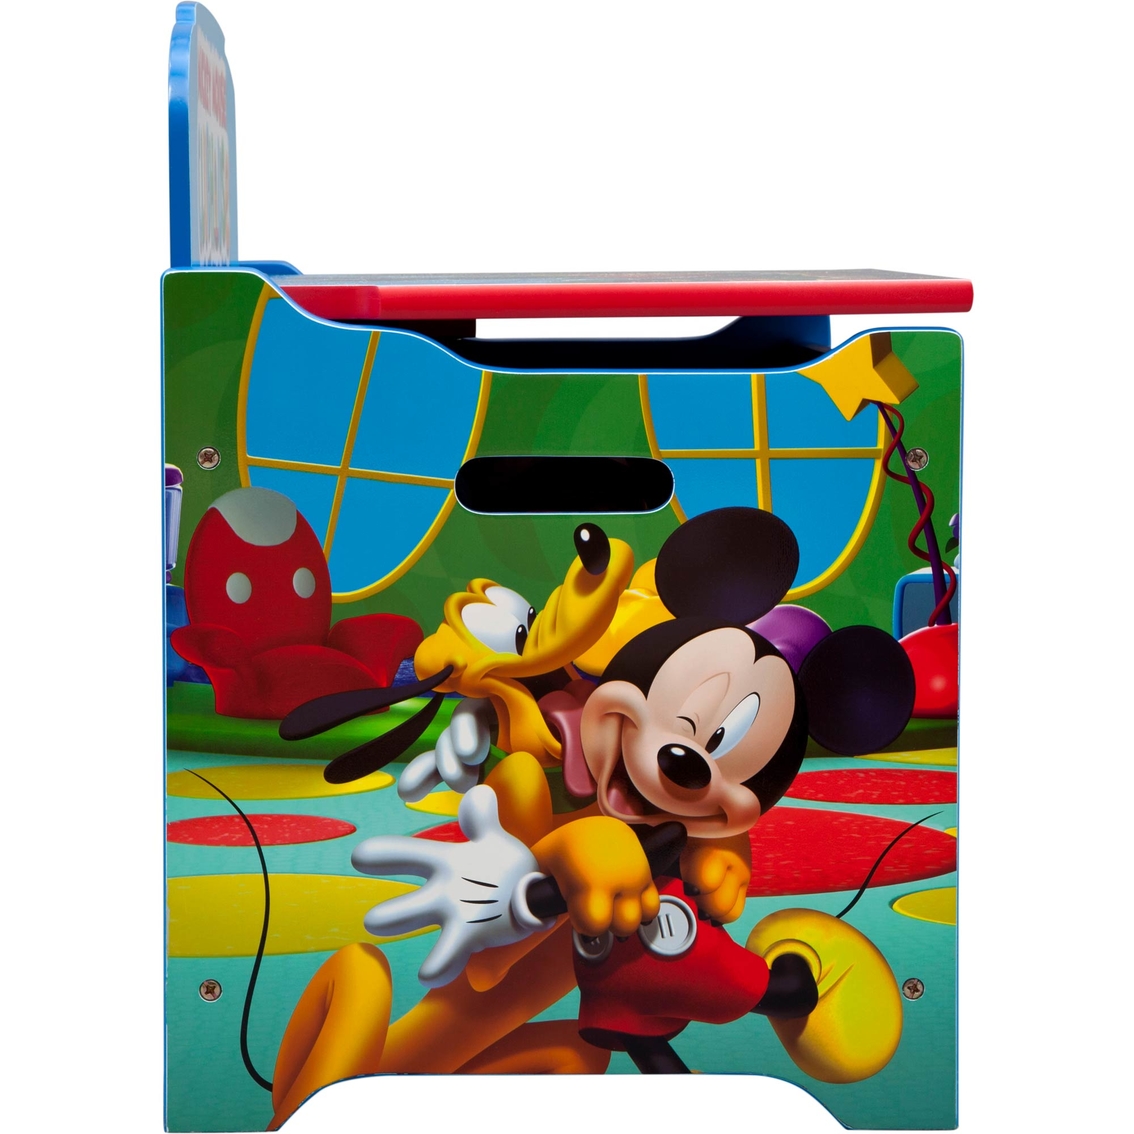 Disney Mickey Mouse Clubhouse Deluxe Toy Box - Image 3 of 4